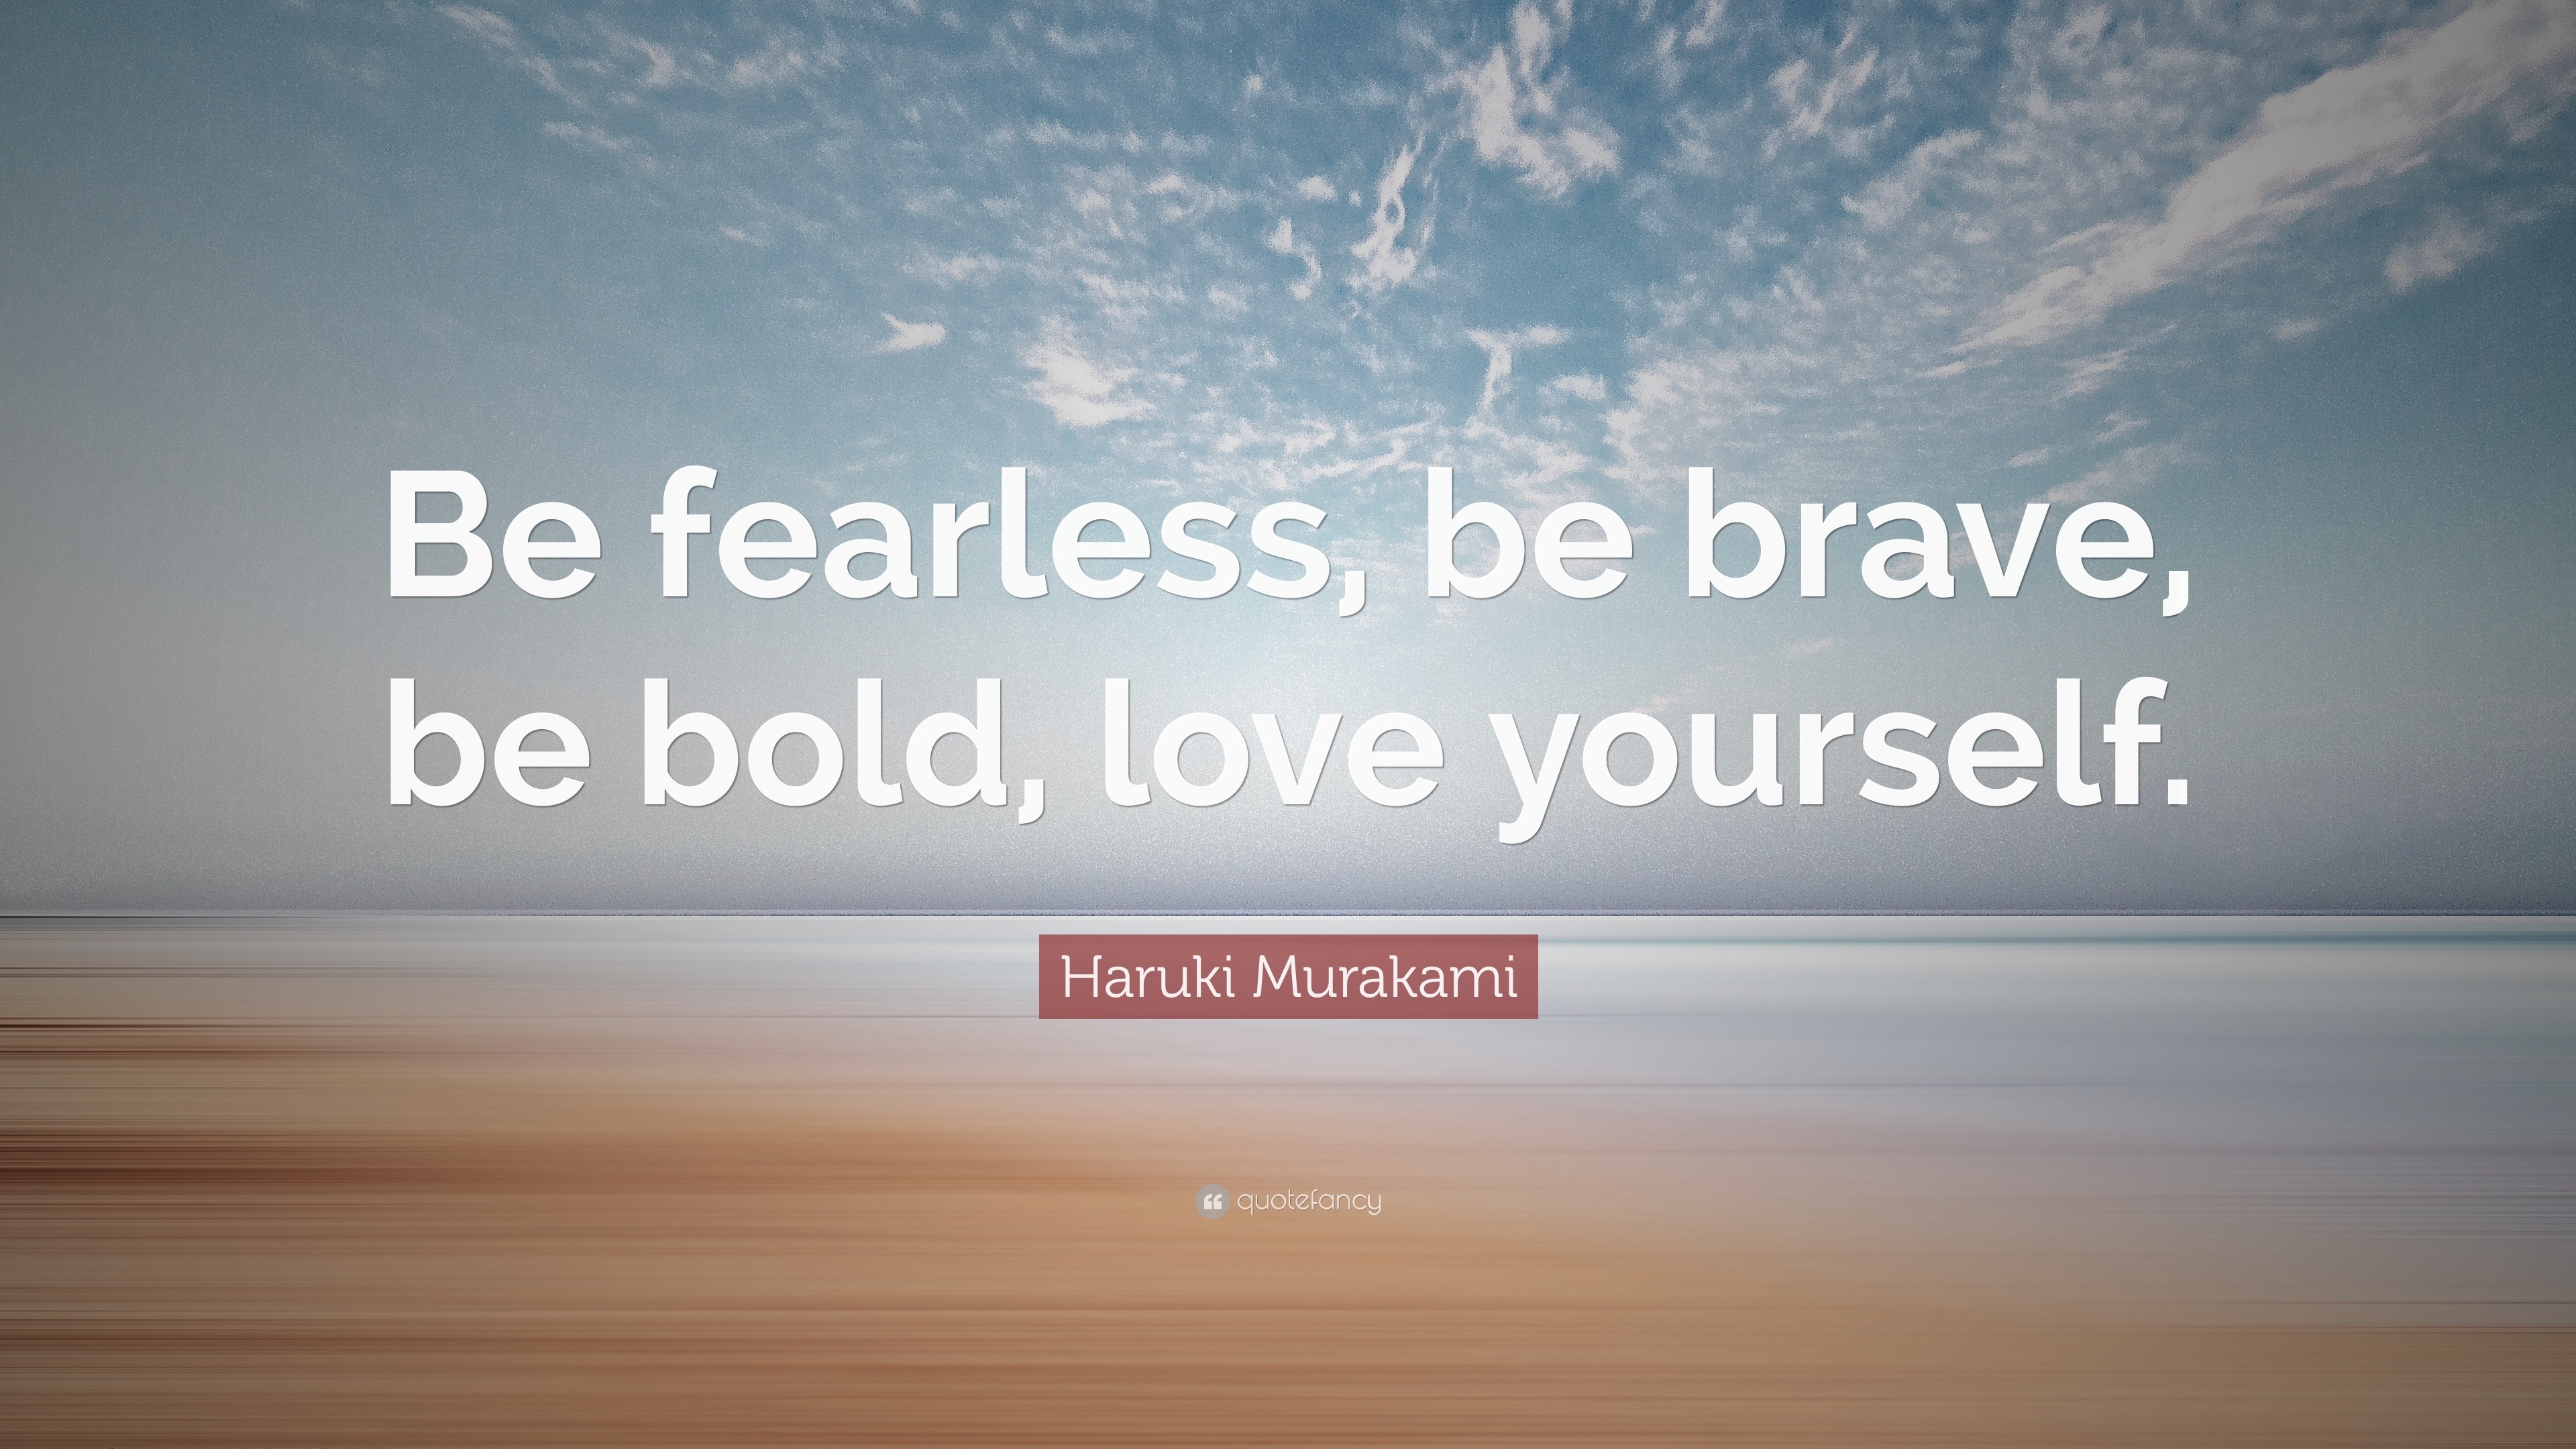 Be Fearless, Be Bold